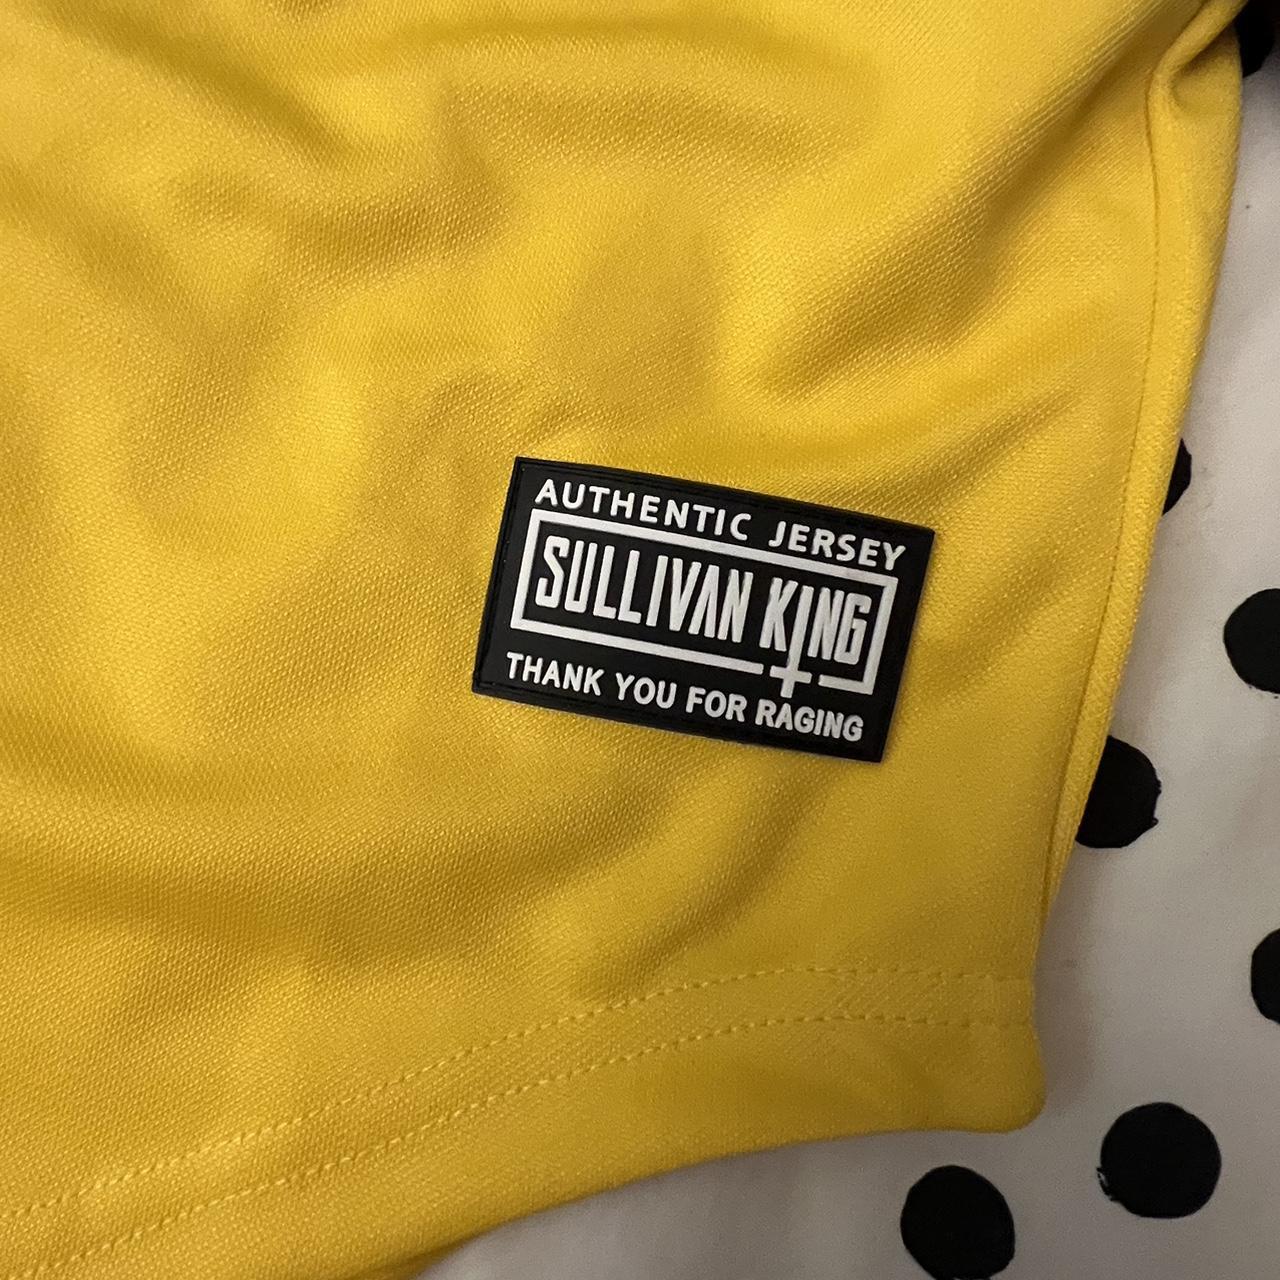 Sullivan King Los Angeles Forever Crop Top - LIMITED EDITION